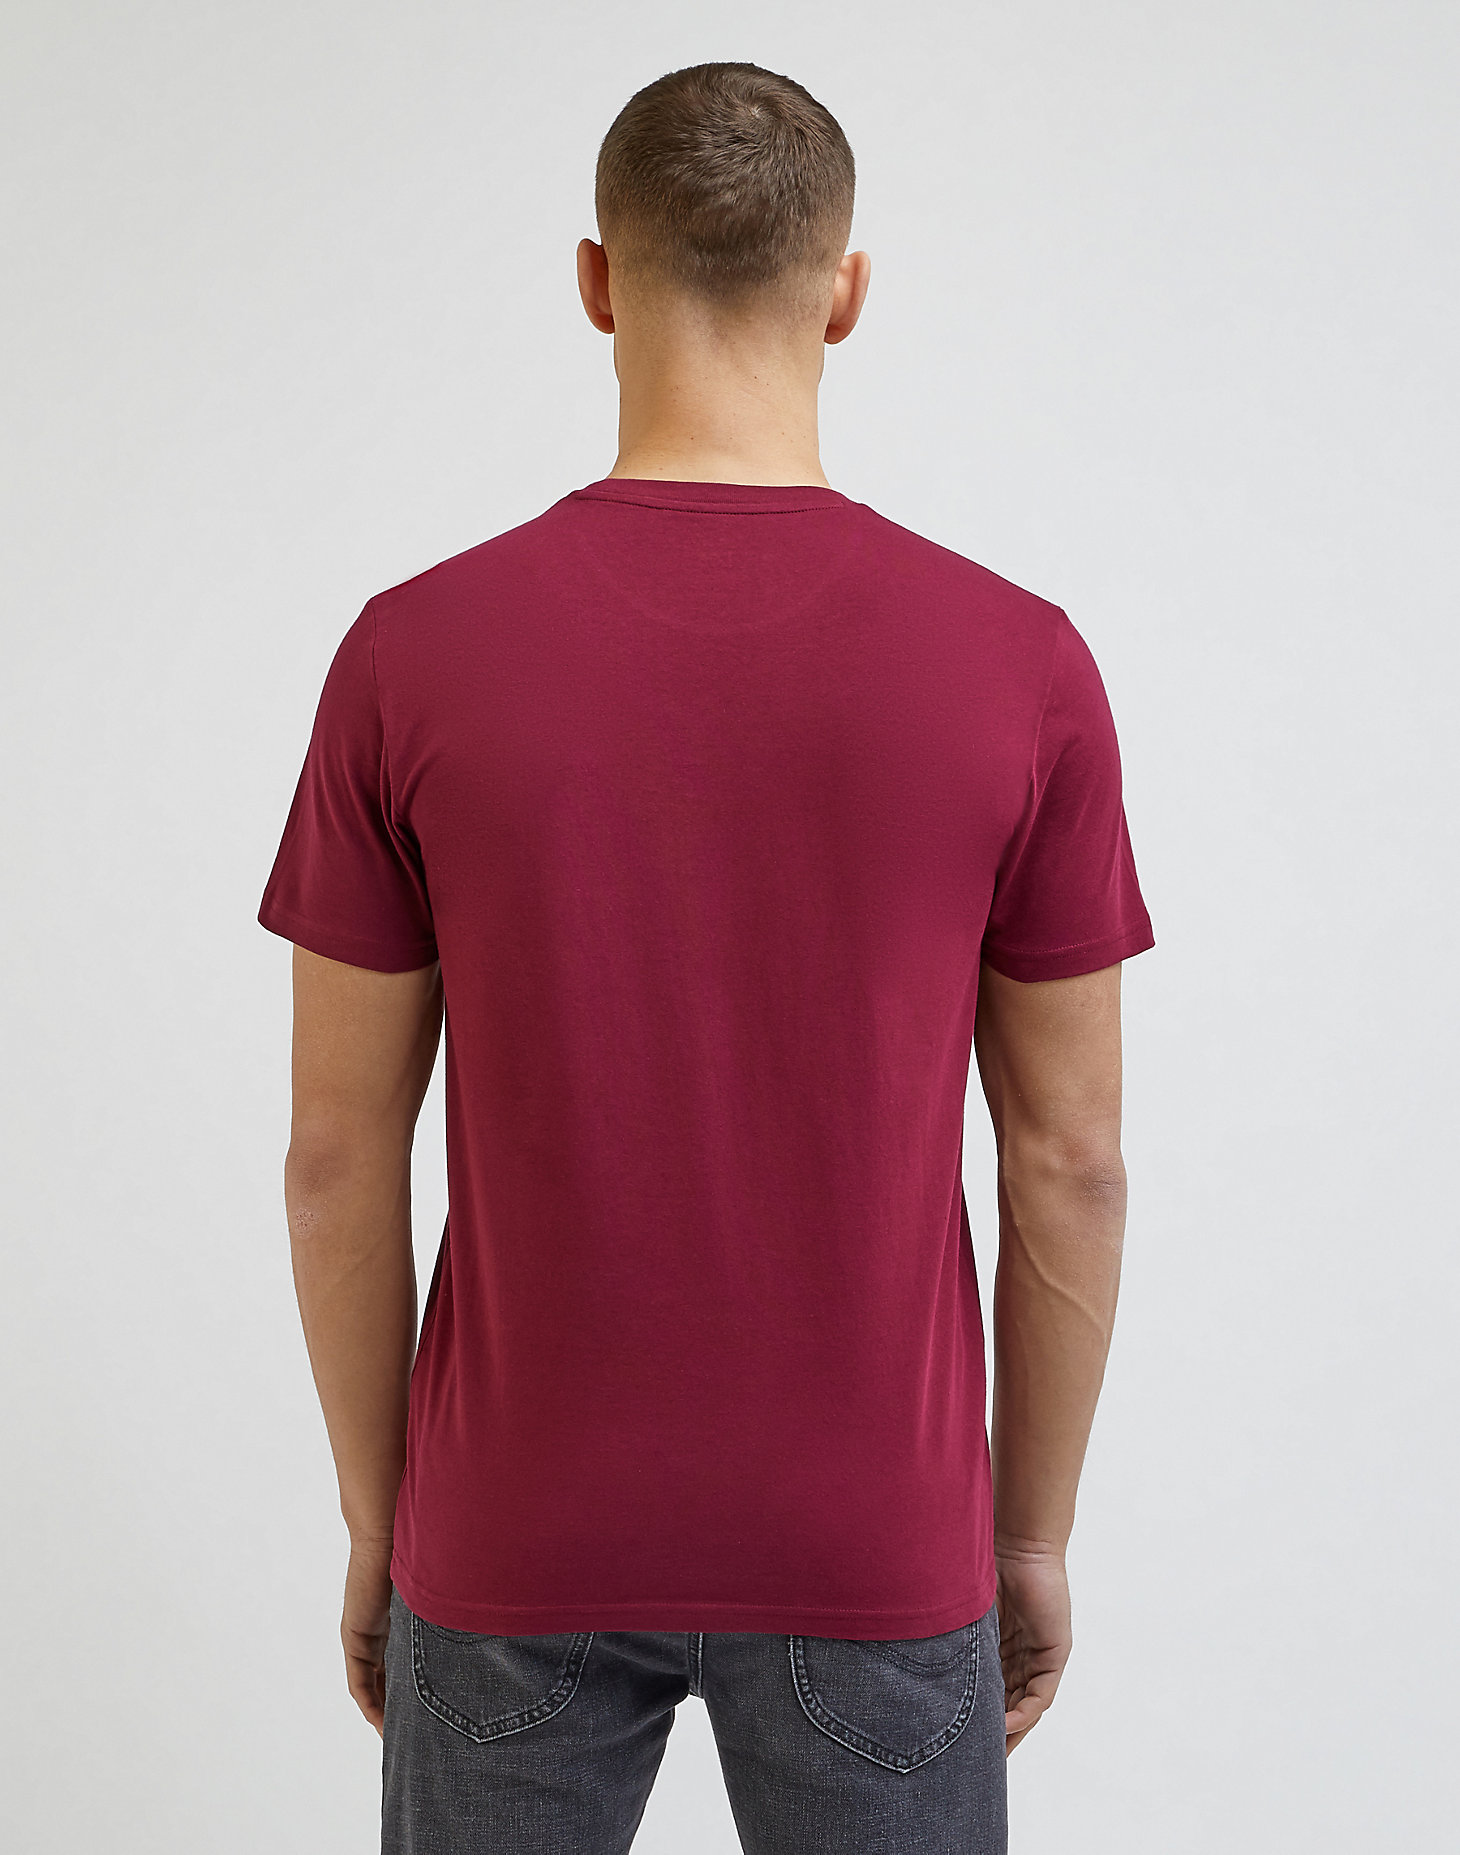 Patch Logo Tee in Port alternative view 1